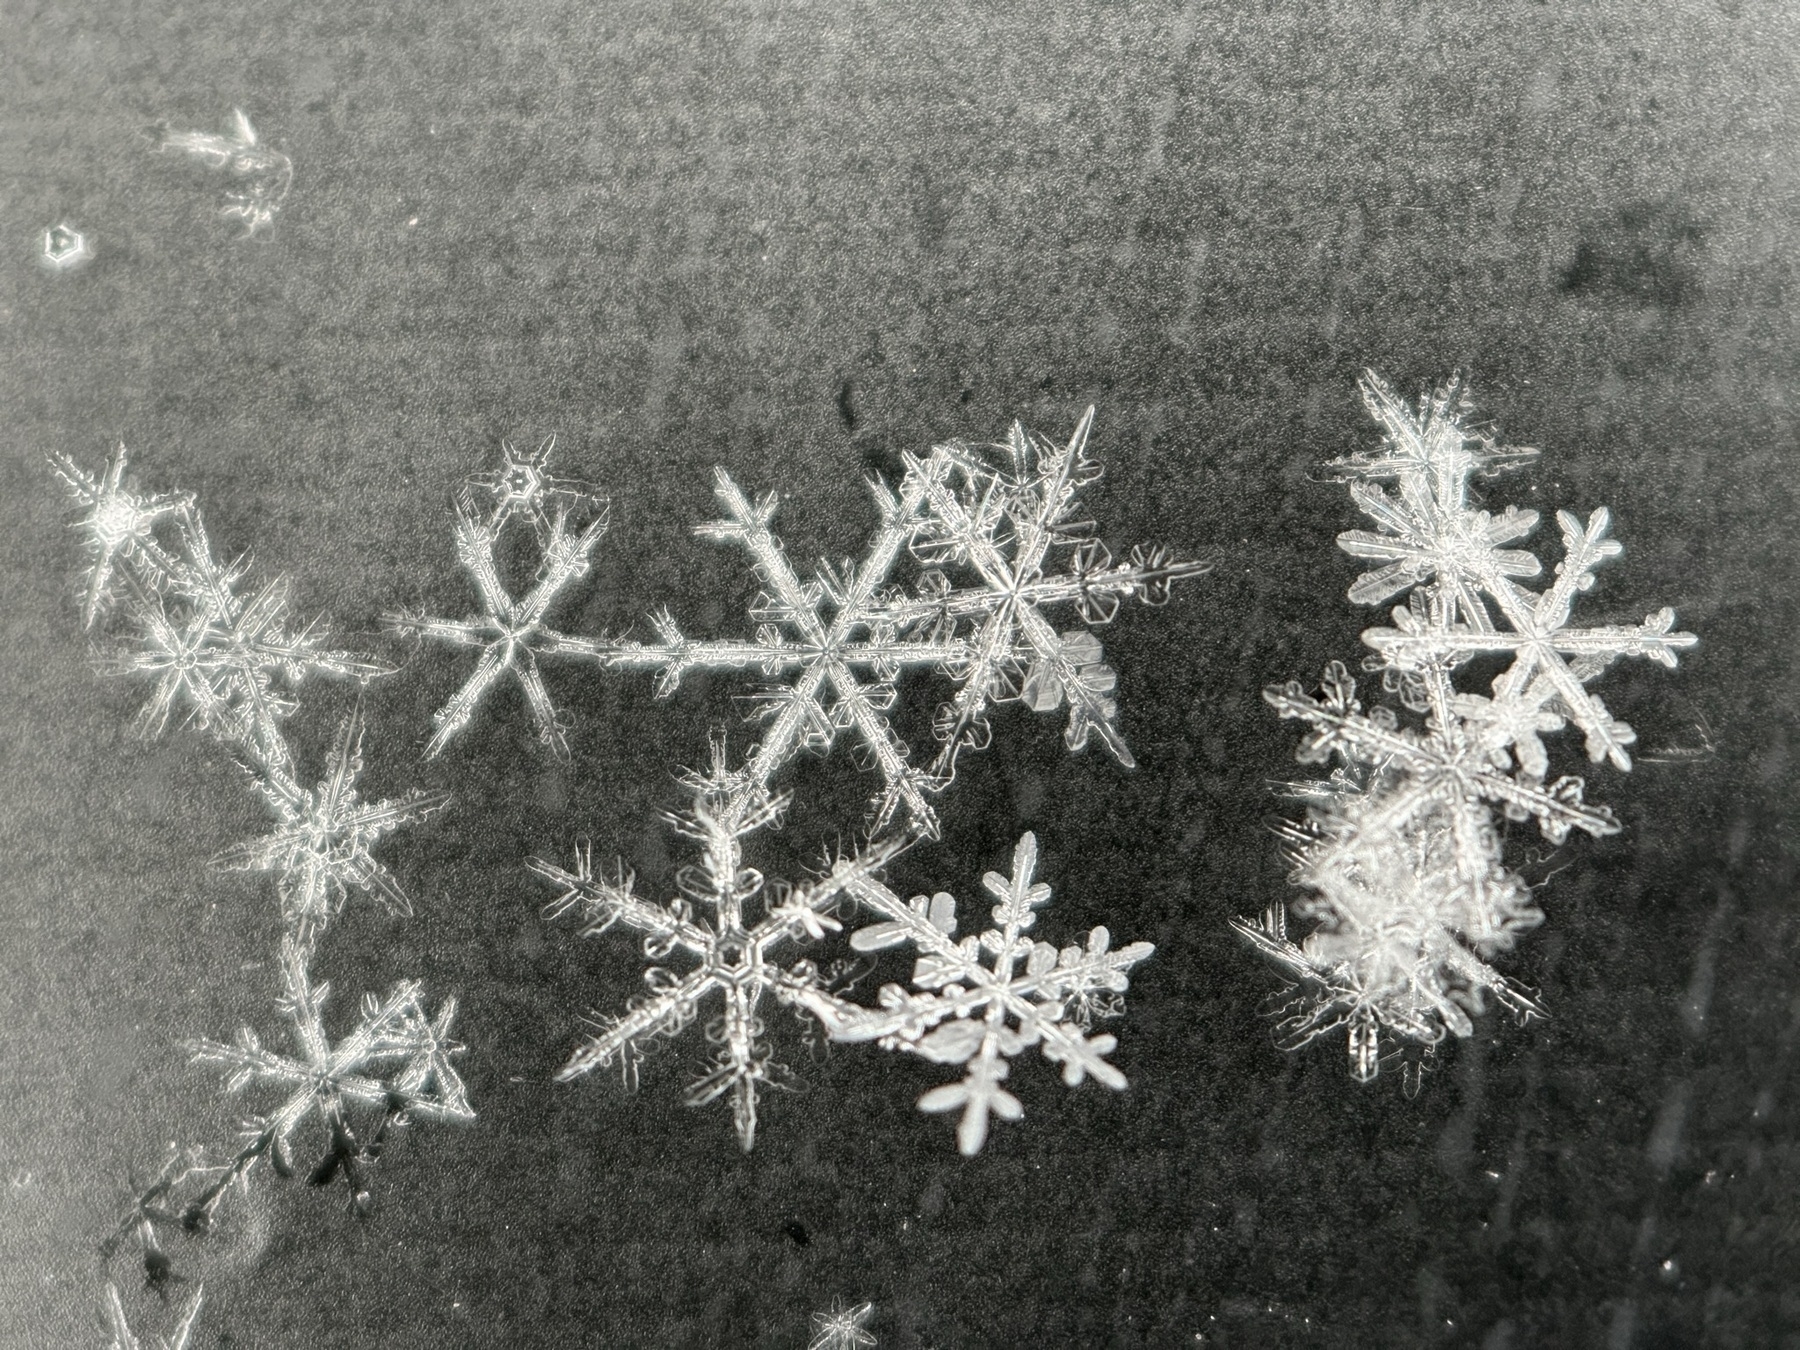 A photograph of snowflakes taken with a macro lens.